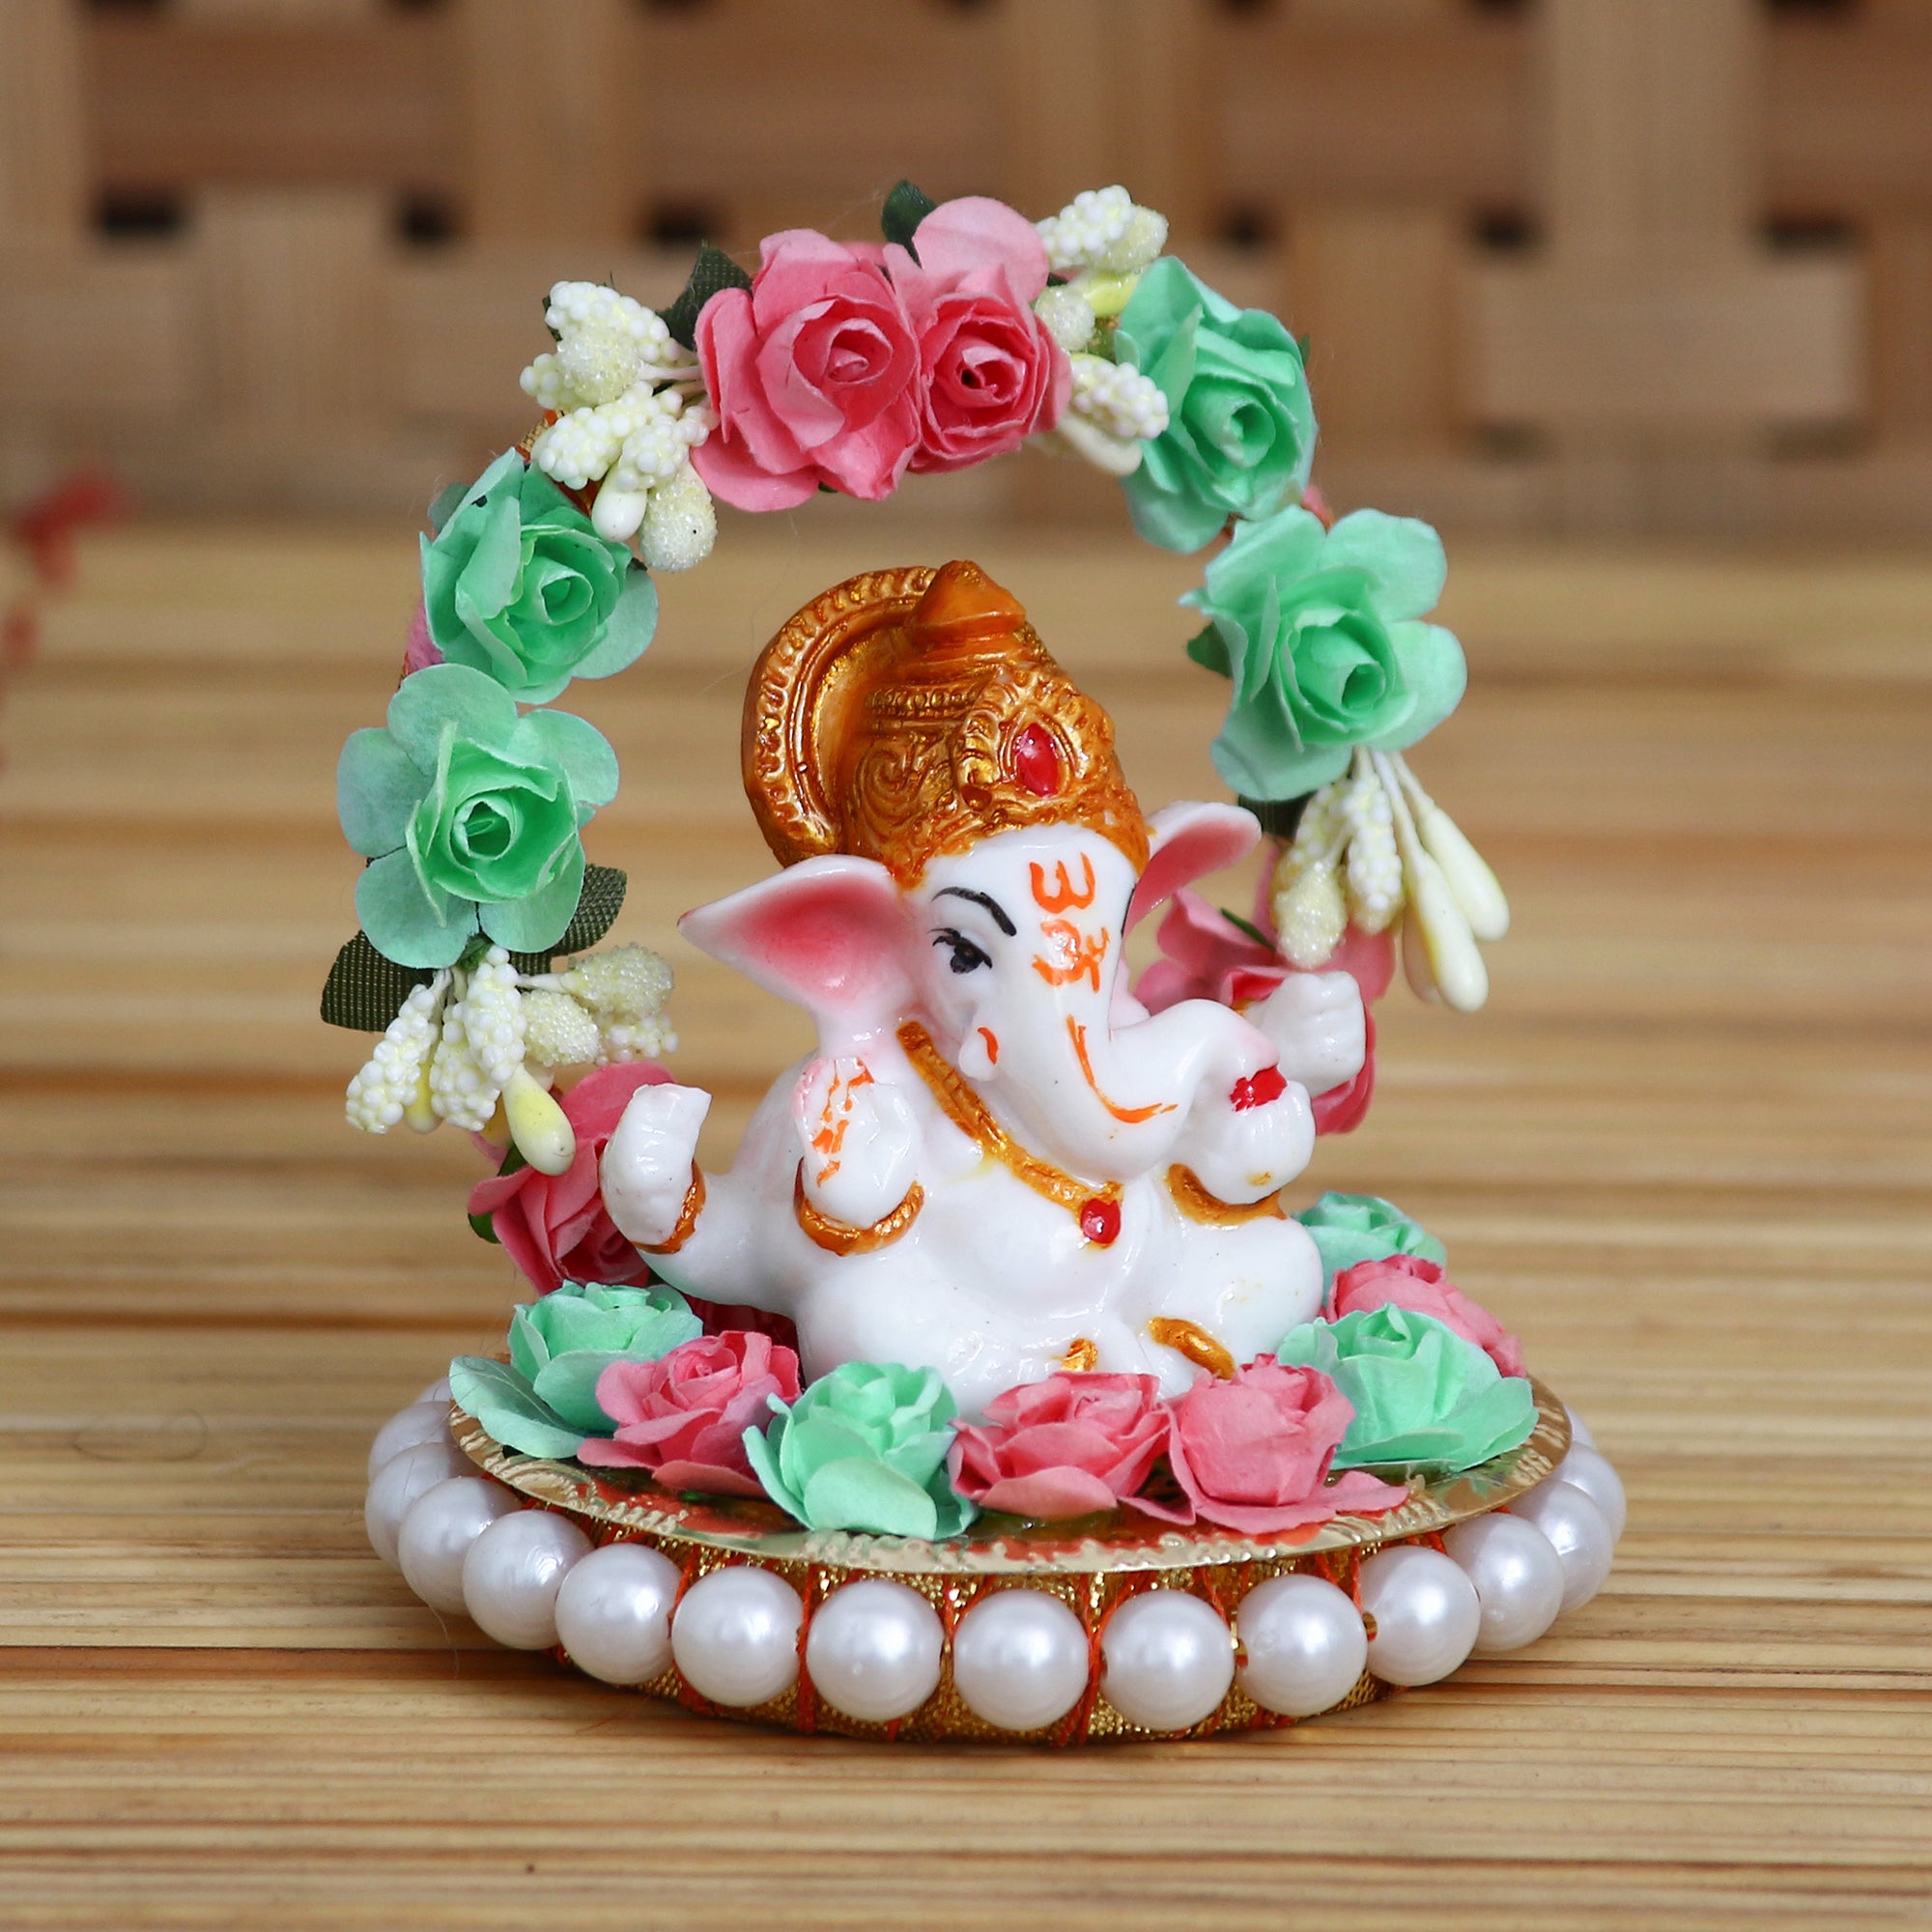 Lord Ganesha Idol On Decorative Handicrafted Plate With Throne Of Pink And Green Flowers 1